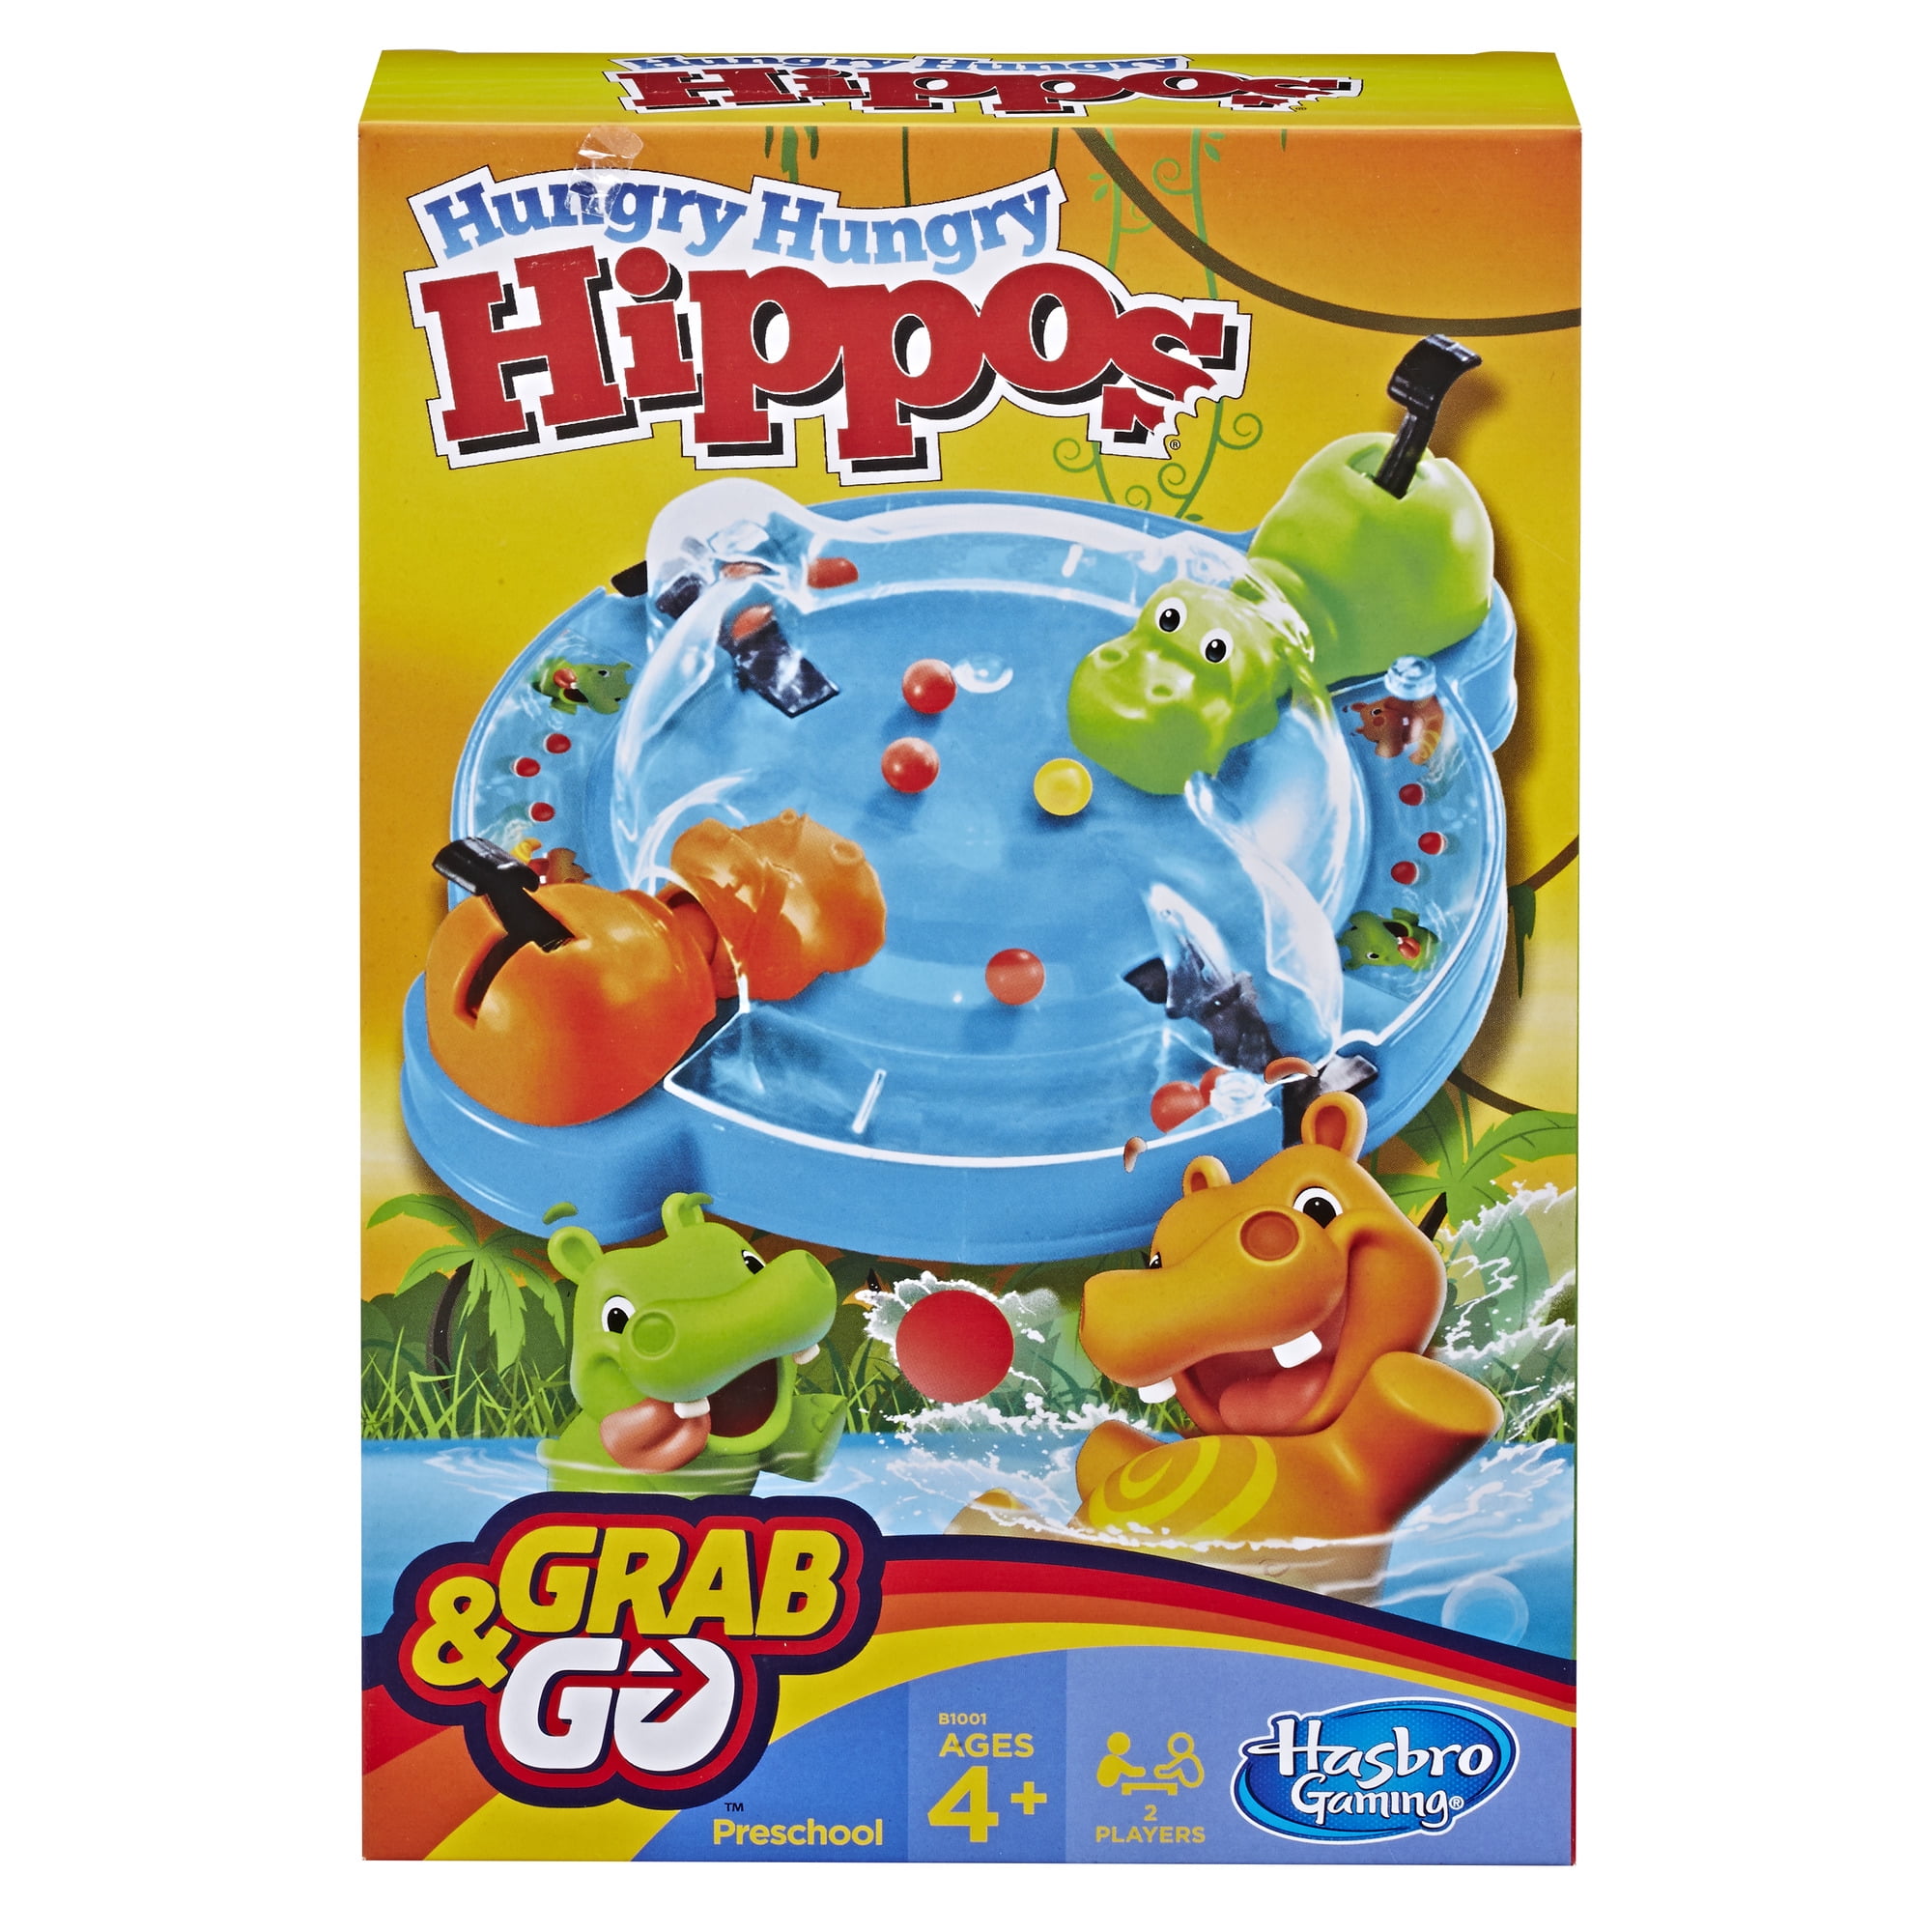 Includes 2 Chomping Hippos Elefun & Friends Hungry Hungry Hippos Grab & Go Game 